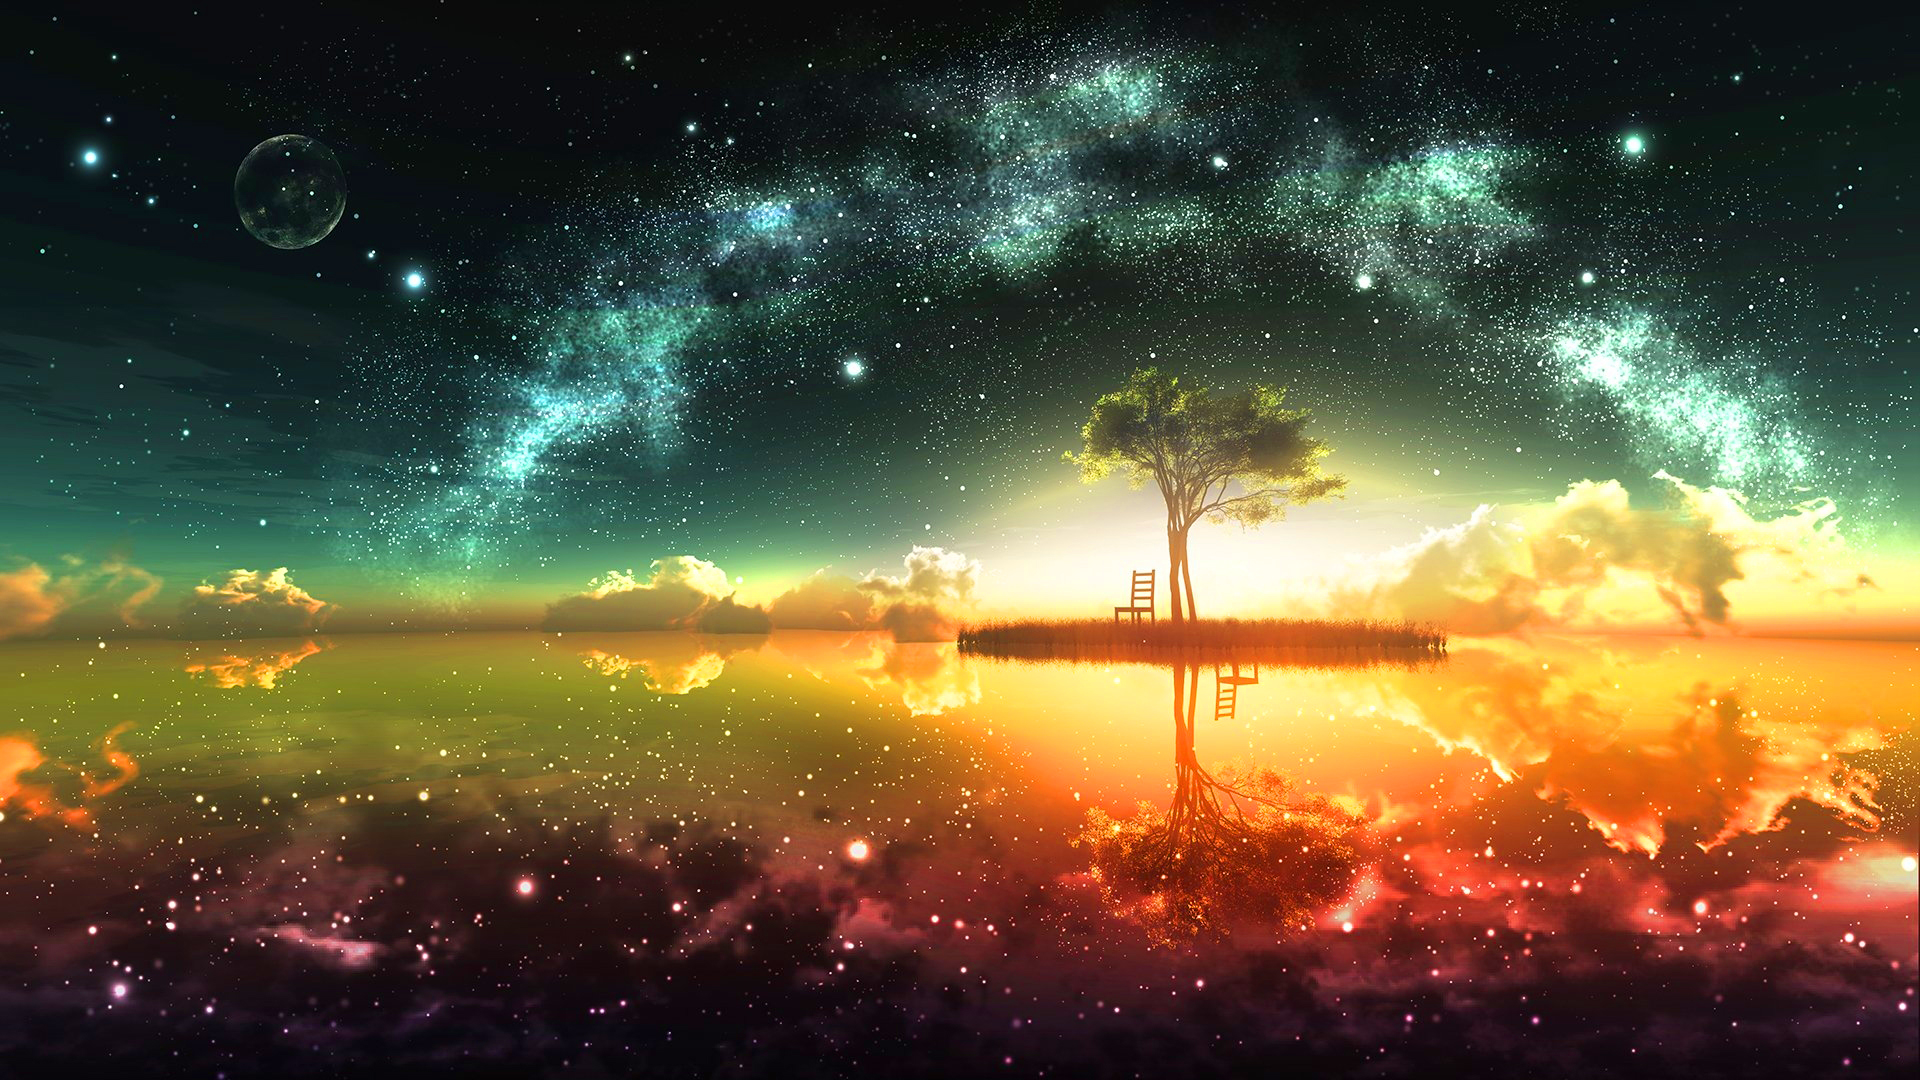 anime-landscape-scenic-tree-chair-stars-reflection-clouds-anime-14309.jpg